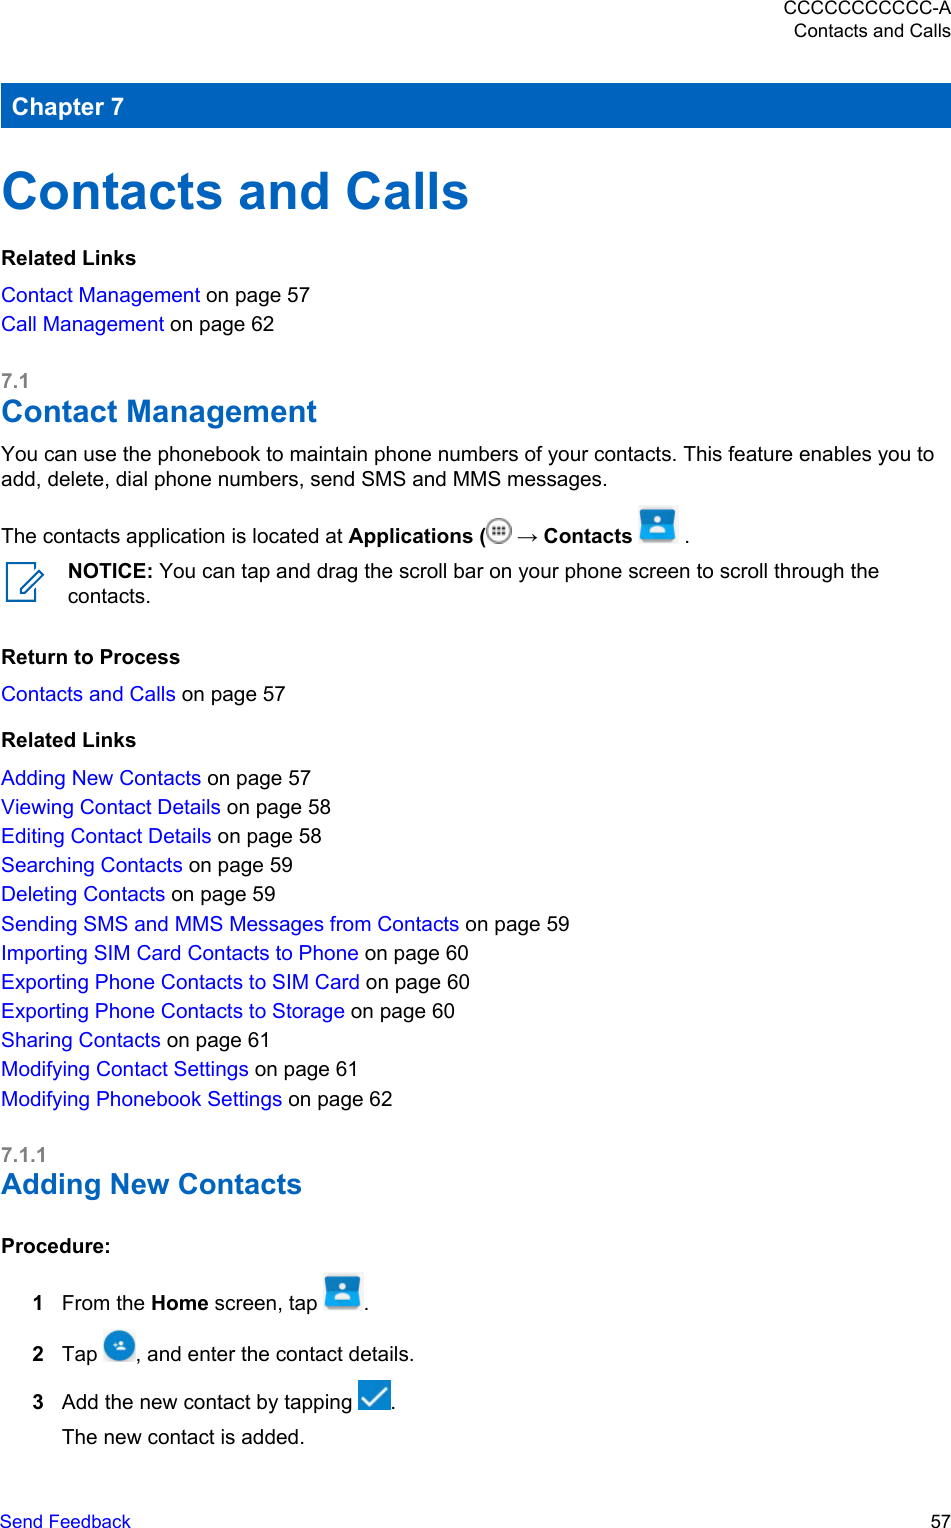 Chapter 7Contacts and CallsRelated LinksContact Management on page 57Call Management on page 627.1Contact ManagementYou can use the phonebook to maintain phone numbers of your contacts. This feature enables you toadd, delete, dial phone numbers, send SMS and MMS messages.The contacts application is located at Applications (  → Contacts   .NOTICE: You can tap and drag the scroll bar on your phone screen to scroll through thecontacts.Return to ProcessContacts and Calls on page 57Related LinksAdding New Contacts on page 57Viewing Contact Details on page 58Editing Contact Details on page 58Searching Contacts on page 59Deleting Contacts on page 59Sending SMS and MMS Messages from Contacts on page 59Importing SIM Card Contacts to Phone on page 60Exporting Phone Contacts to SIM Card on page 60Exporting Phone Contacts to Storage on page 60Sharing Contacts on page 61Modifying Contact Settings on page 61Modifying Phonebook Settings on page 627.1.1Adding New ContactsProcedure:1From the Home screen, tap  .2Tap  , and enter the contact details.3Add the new contact by tapping  .The new contact is added.CCCCCCCCCCC-AContacts and CallsSend Feedback   57